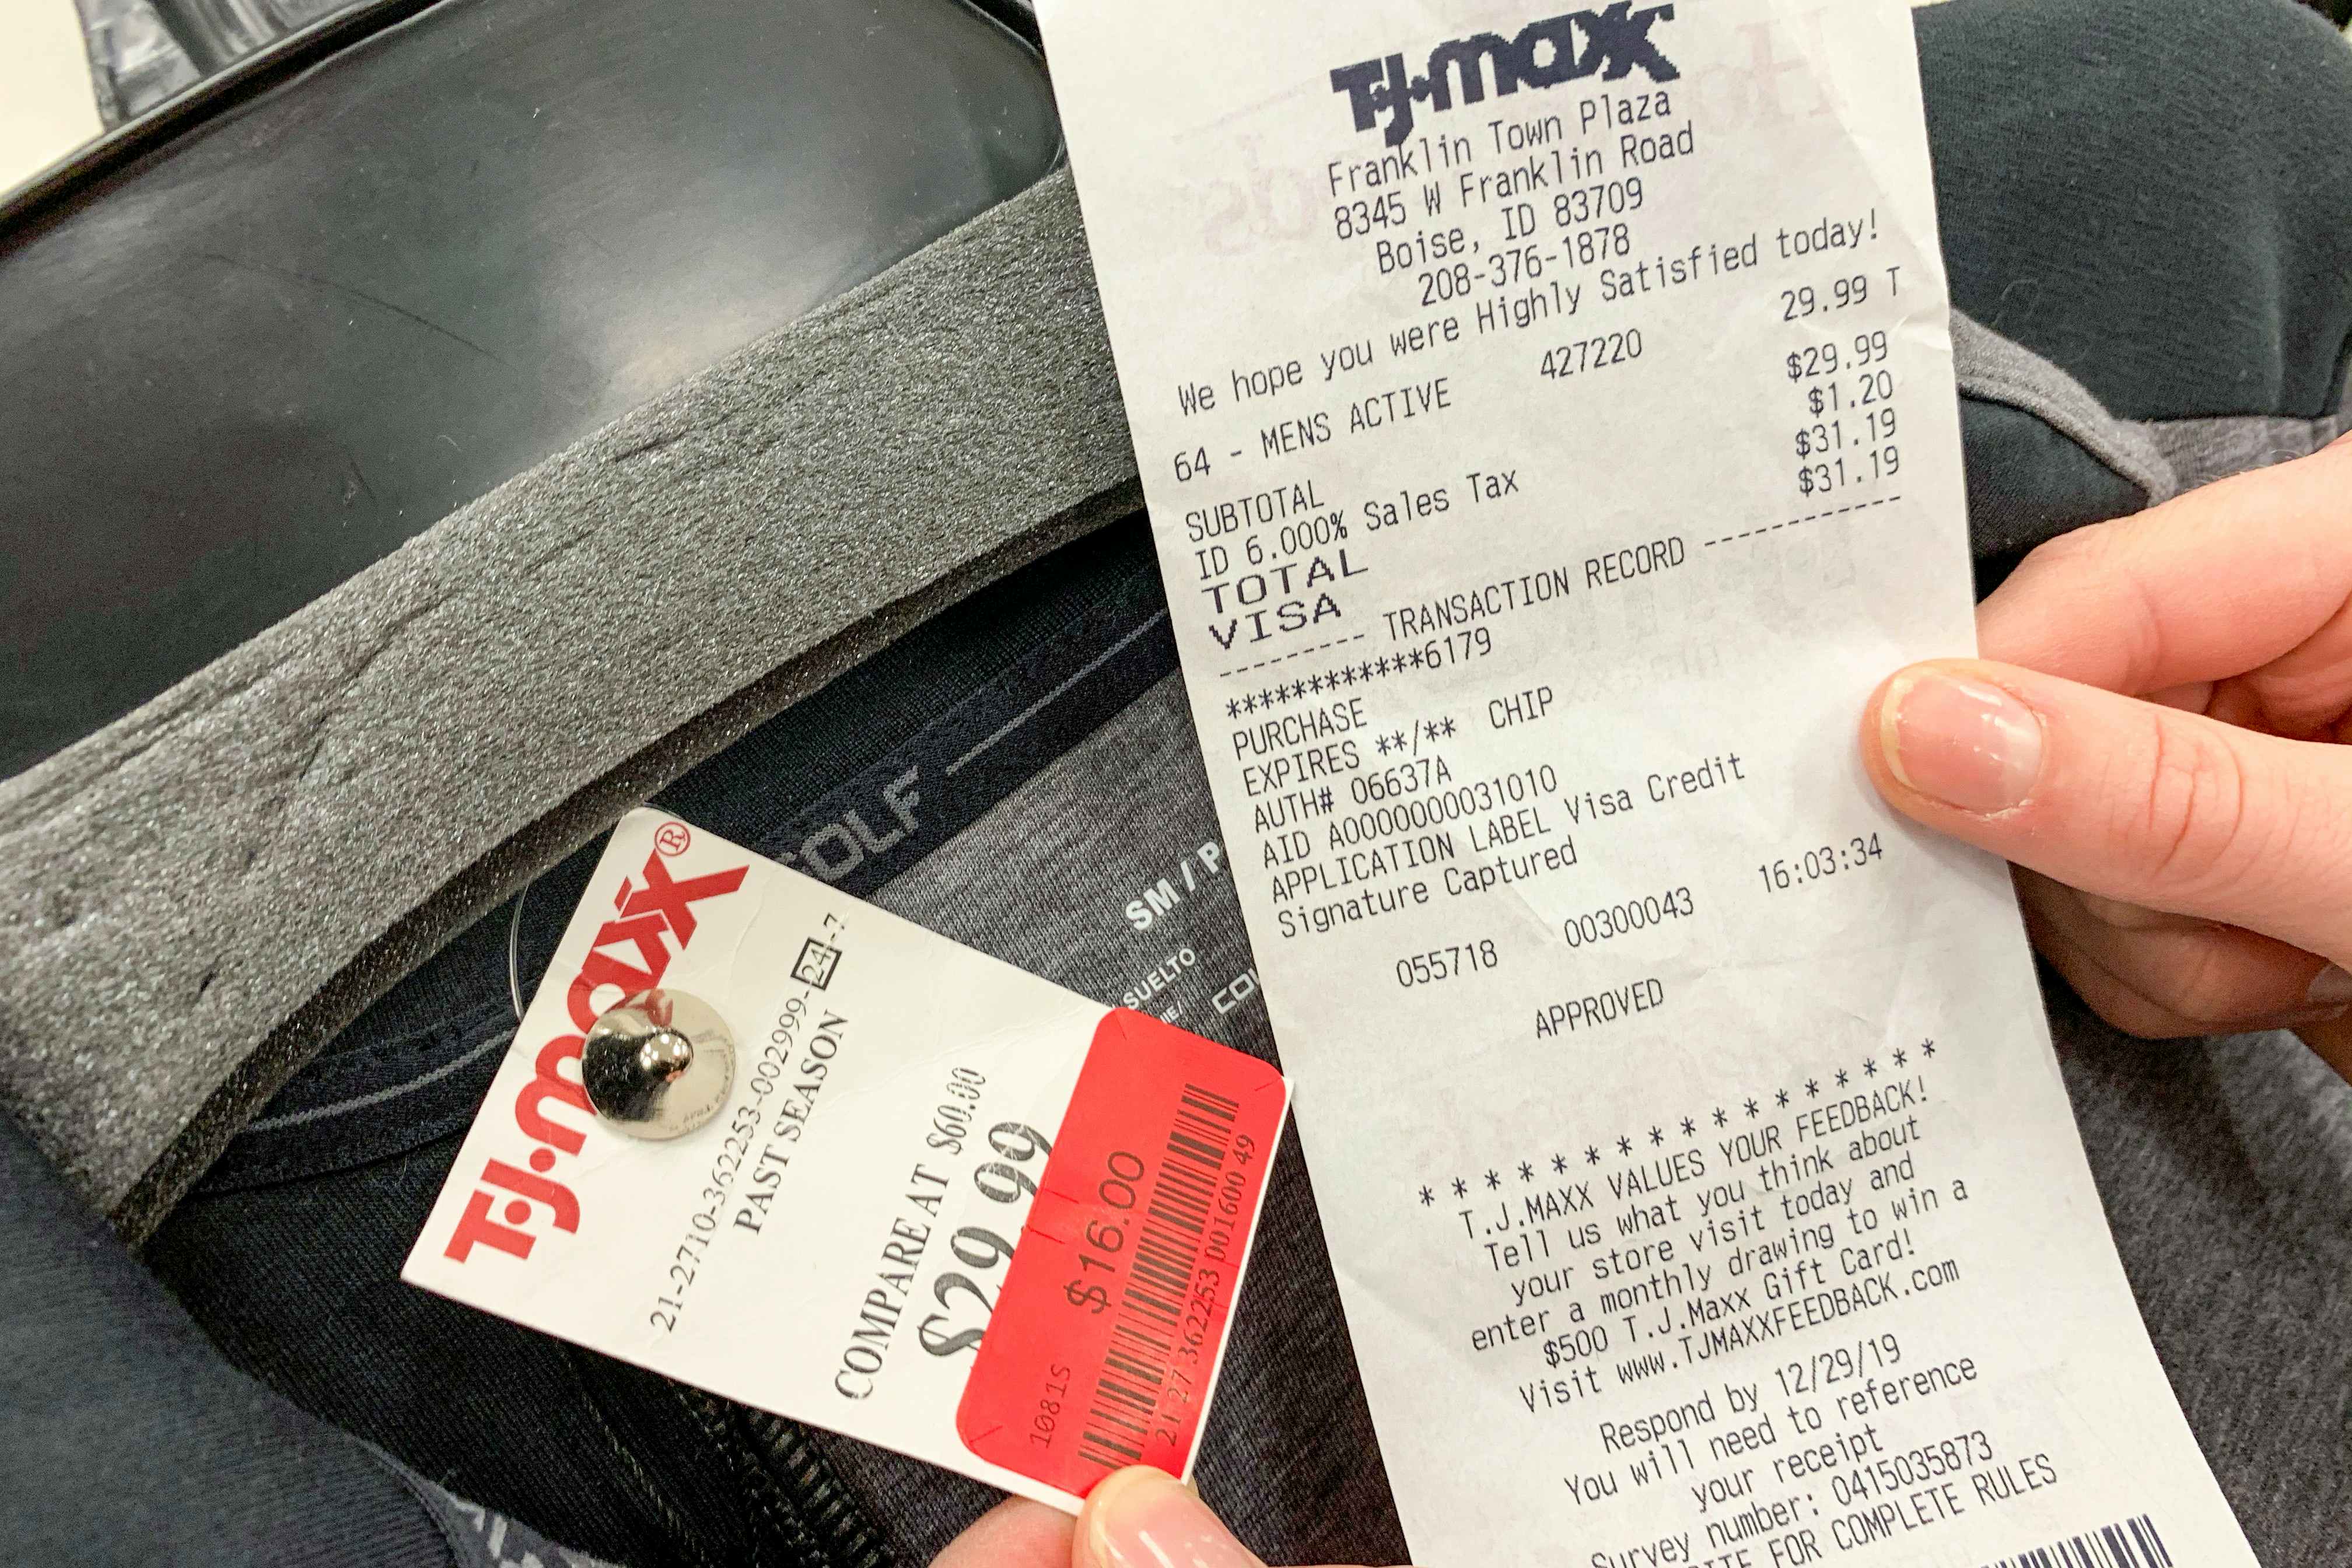 Secrets to save even more at TJ Maxx and Marshalls